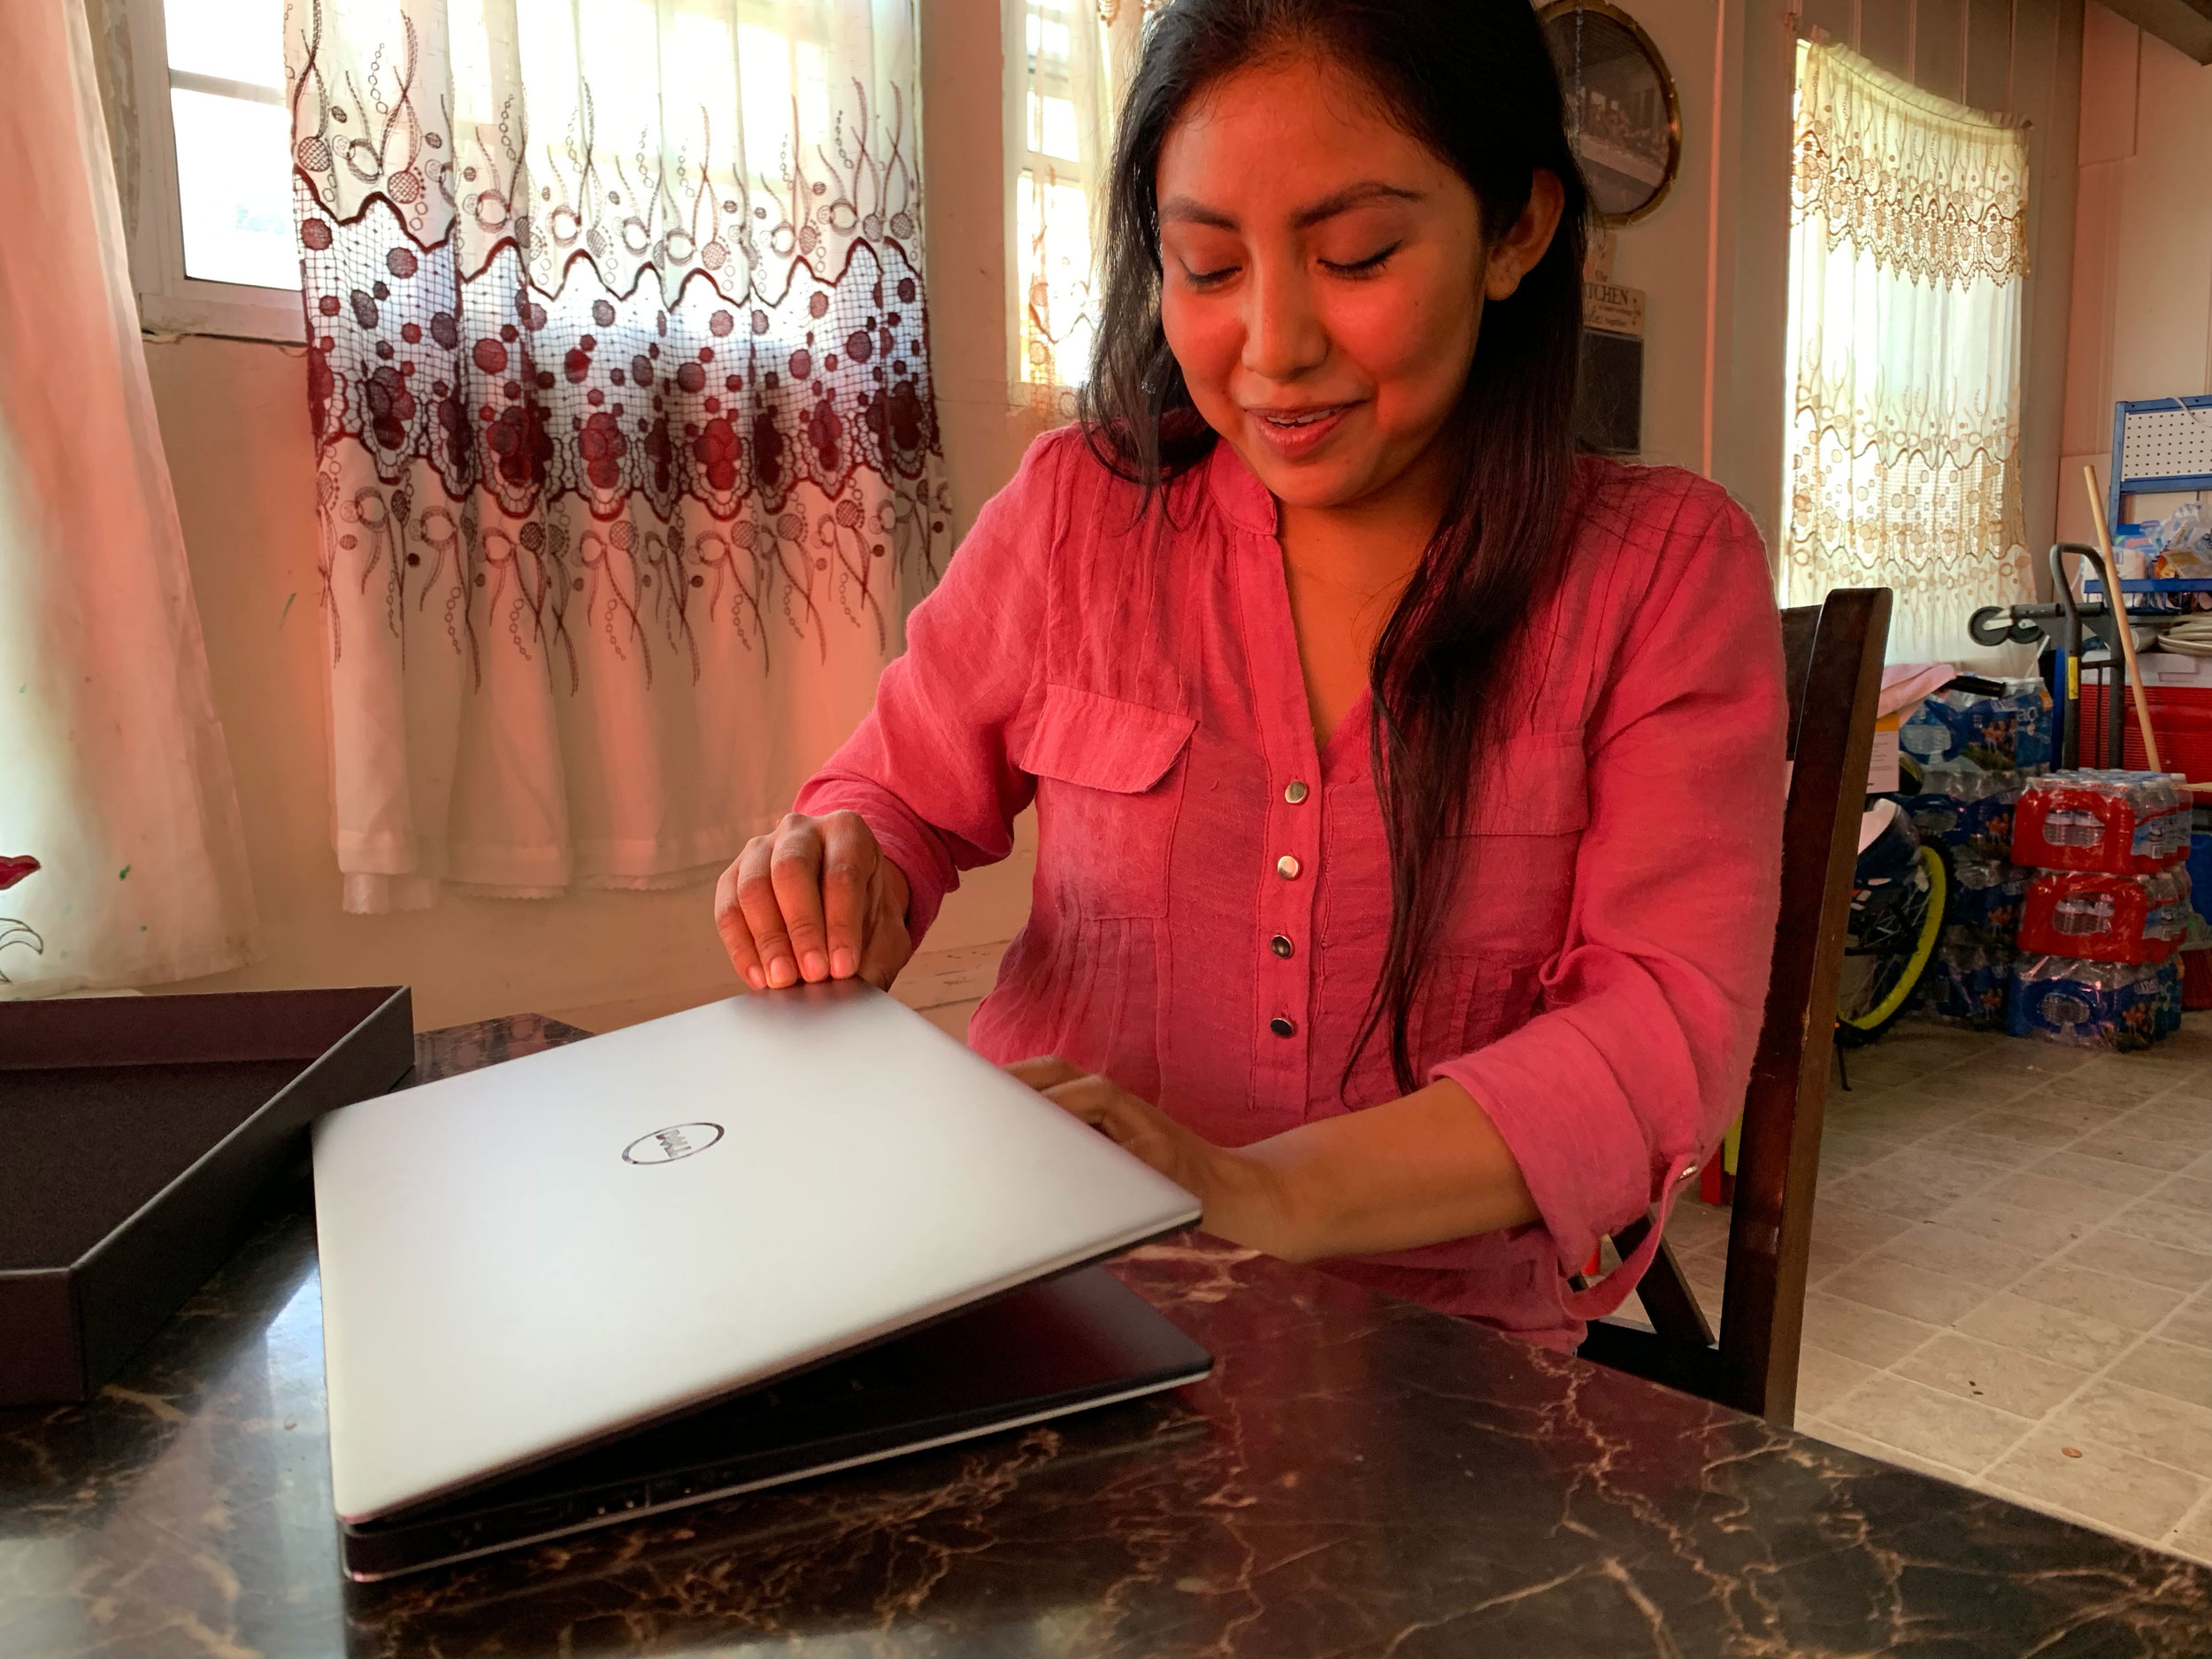  Ana opening her new laptop for the first time! 